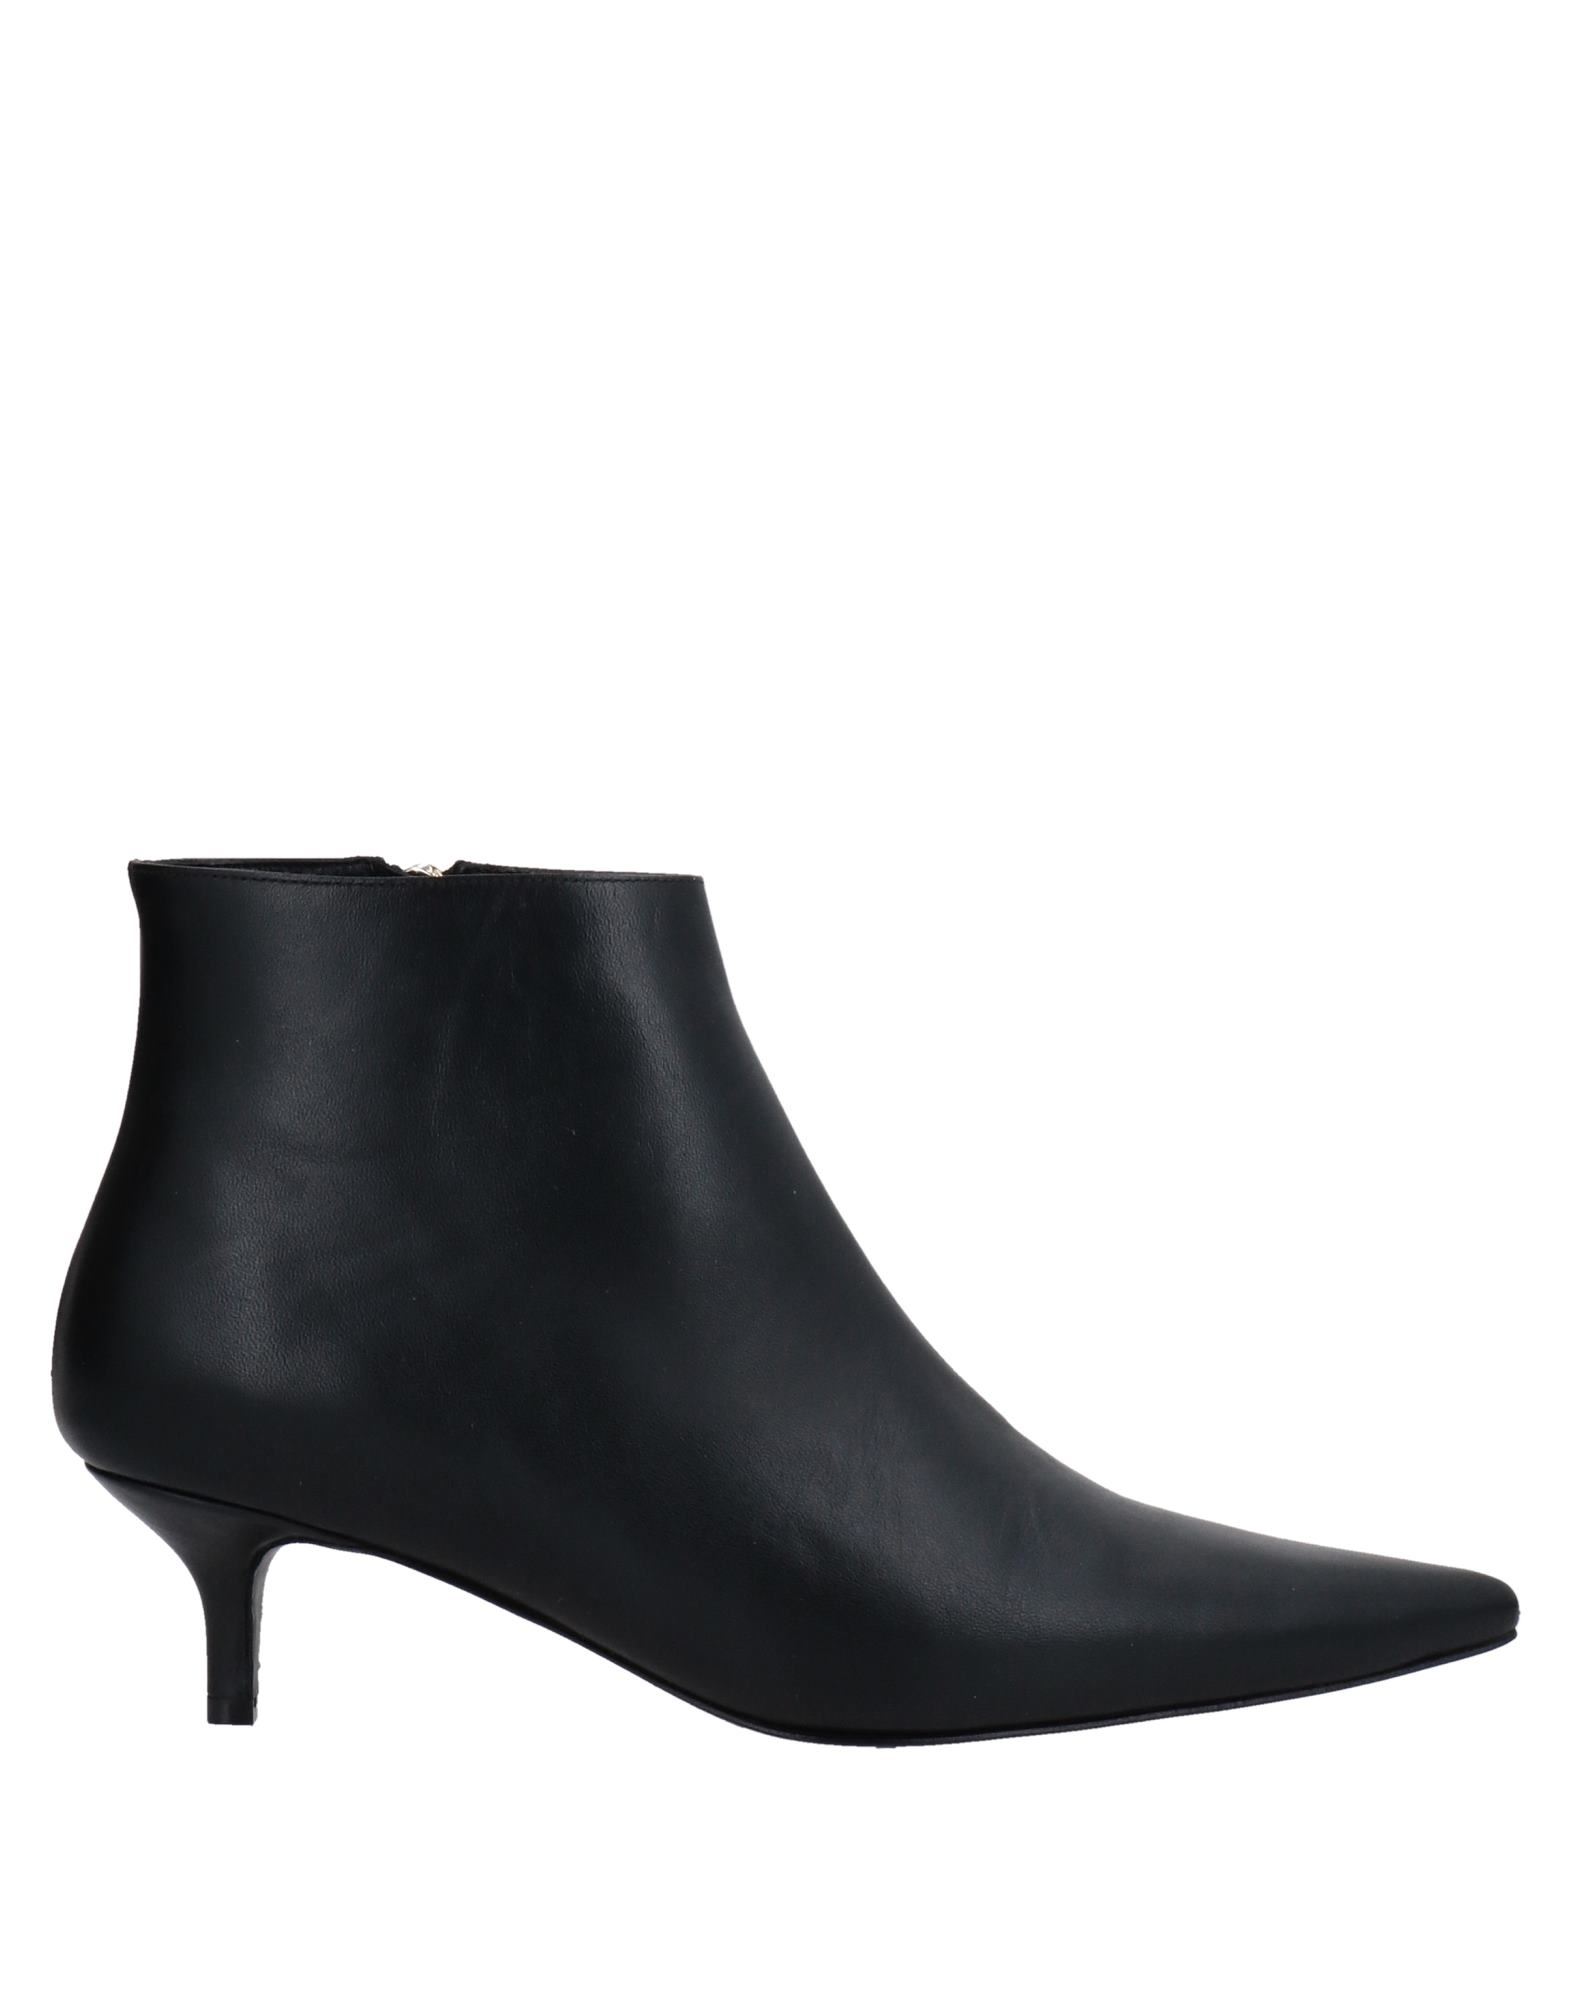 ANINE BING Ankle boots | Smart Closet